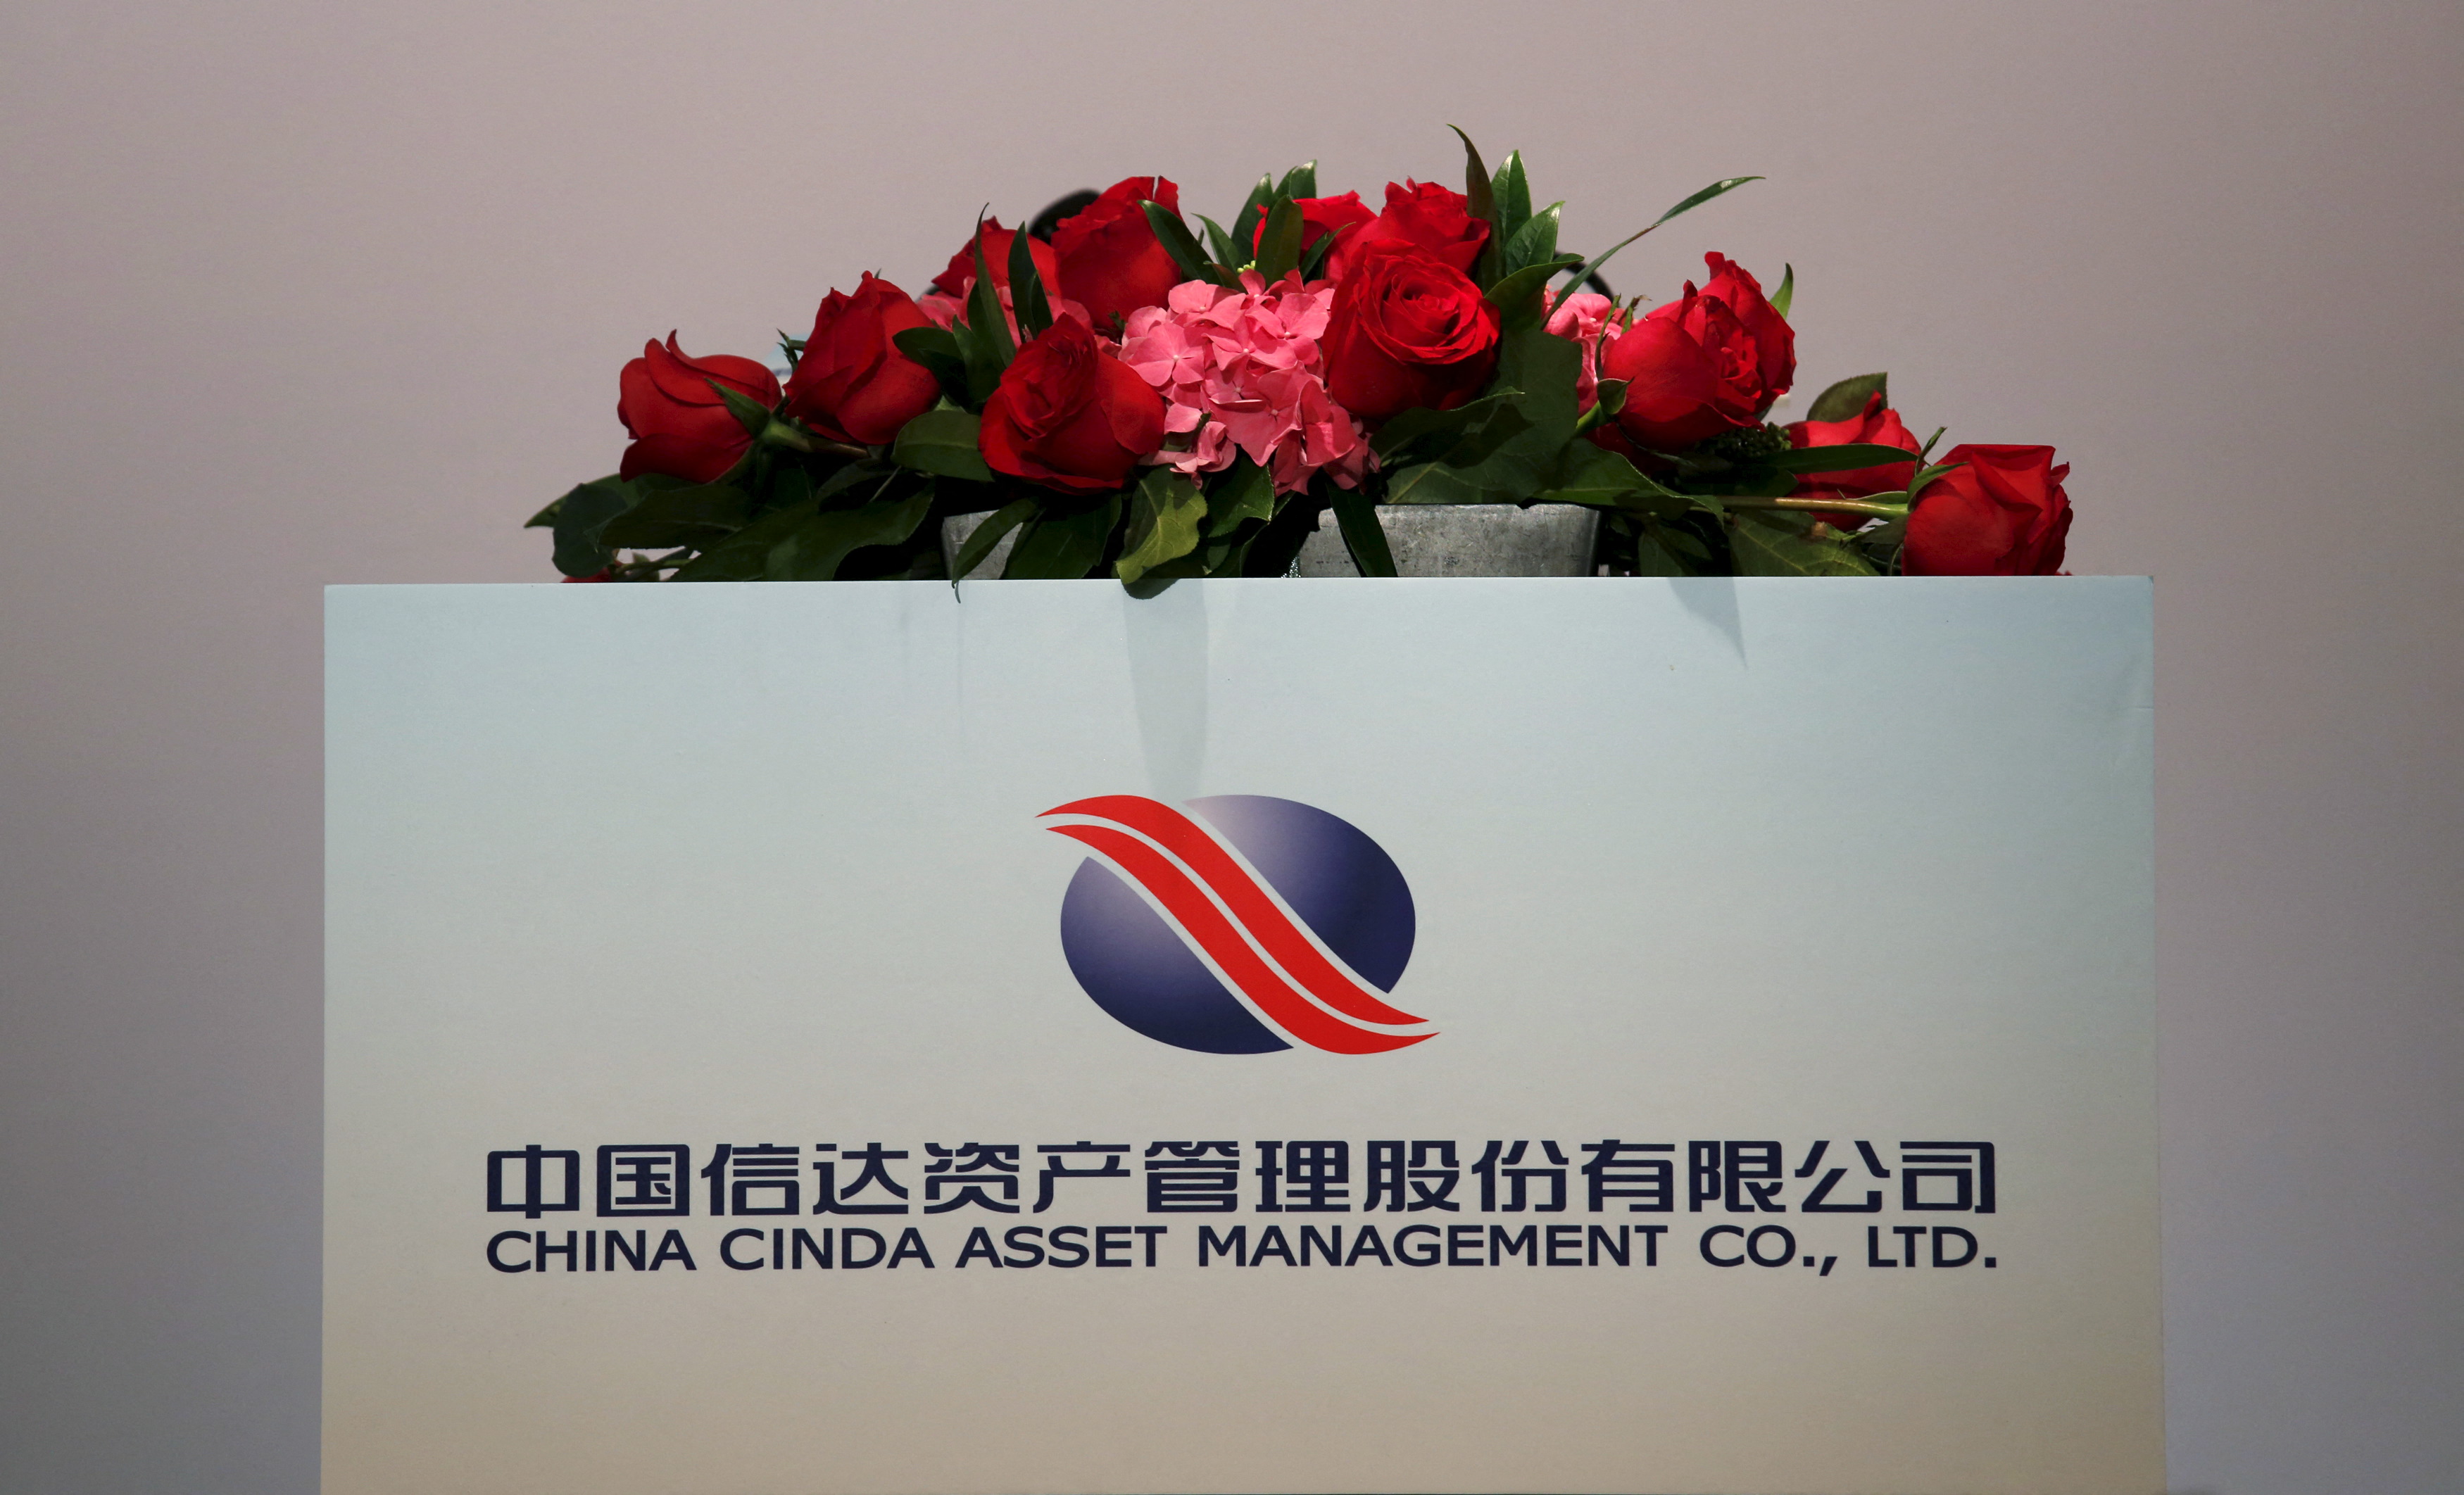 The company logo of China Cinda Asset Management Co Ltd is displayed at a news conference on the company's annual results in Hong Kong